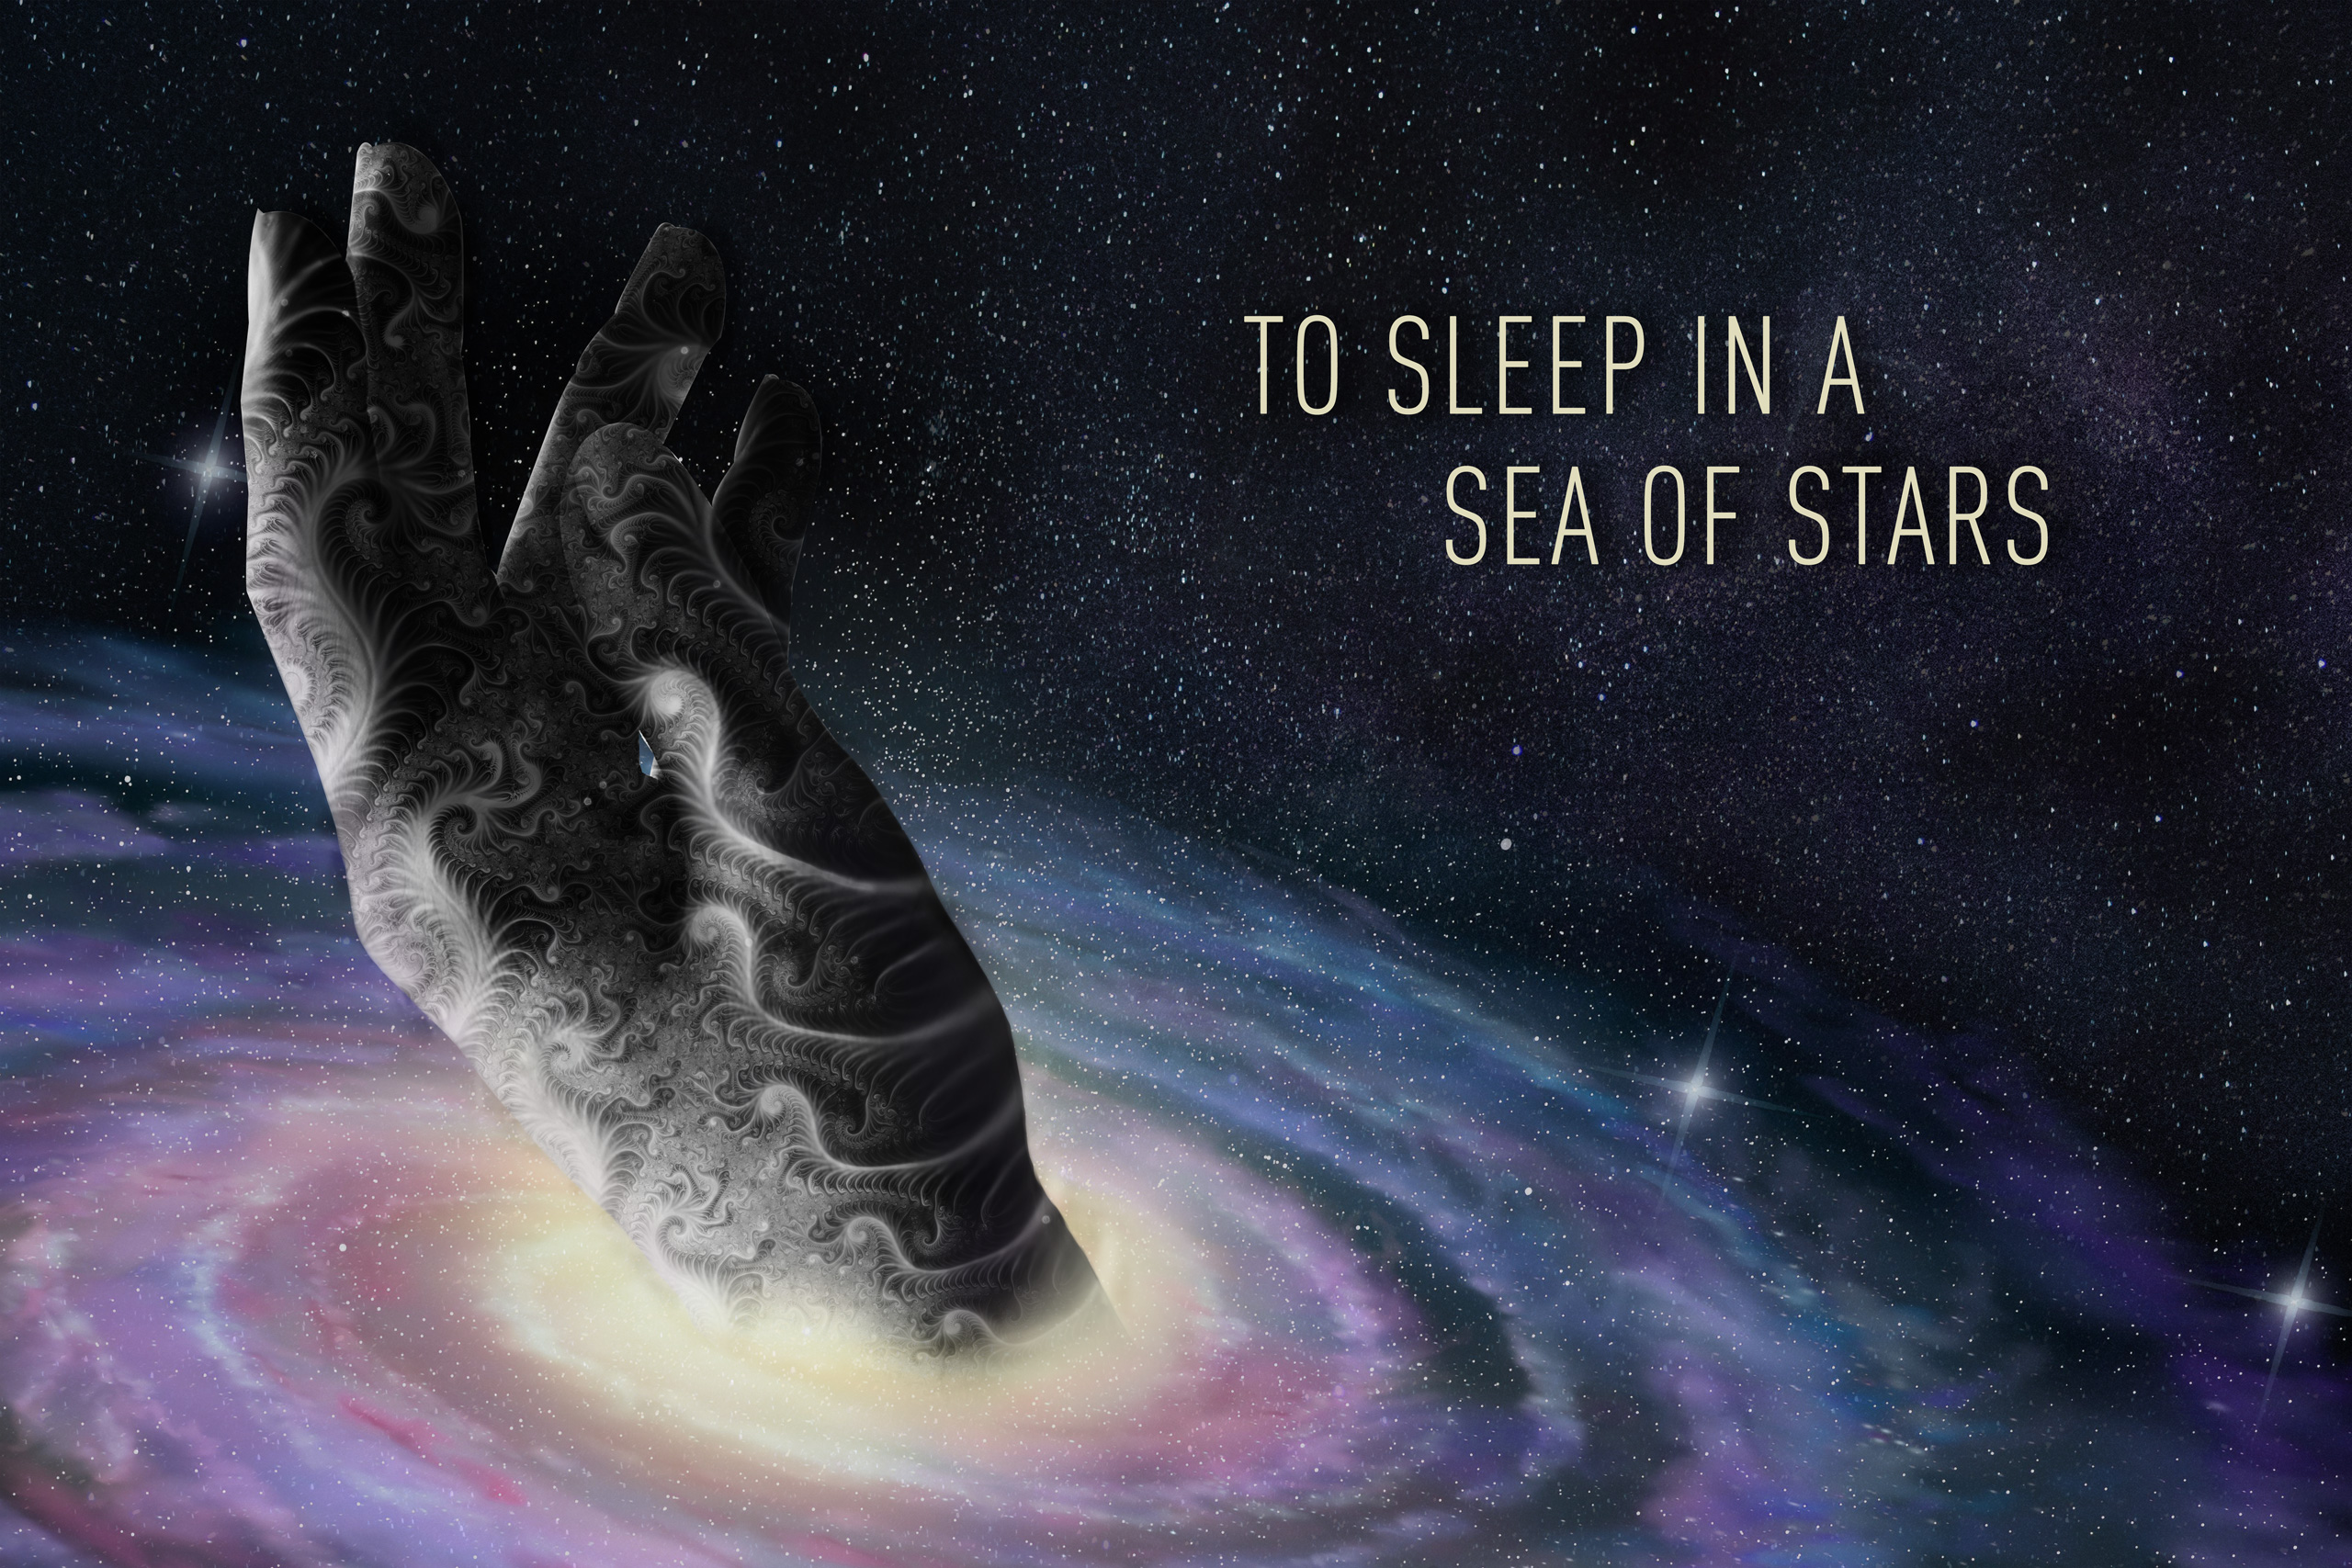 To Sleep in a Sea of Stars Desktop Background